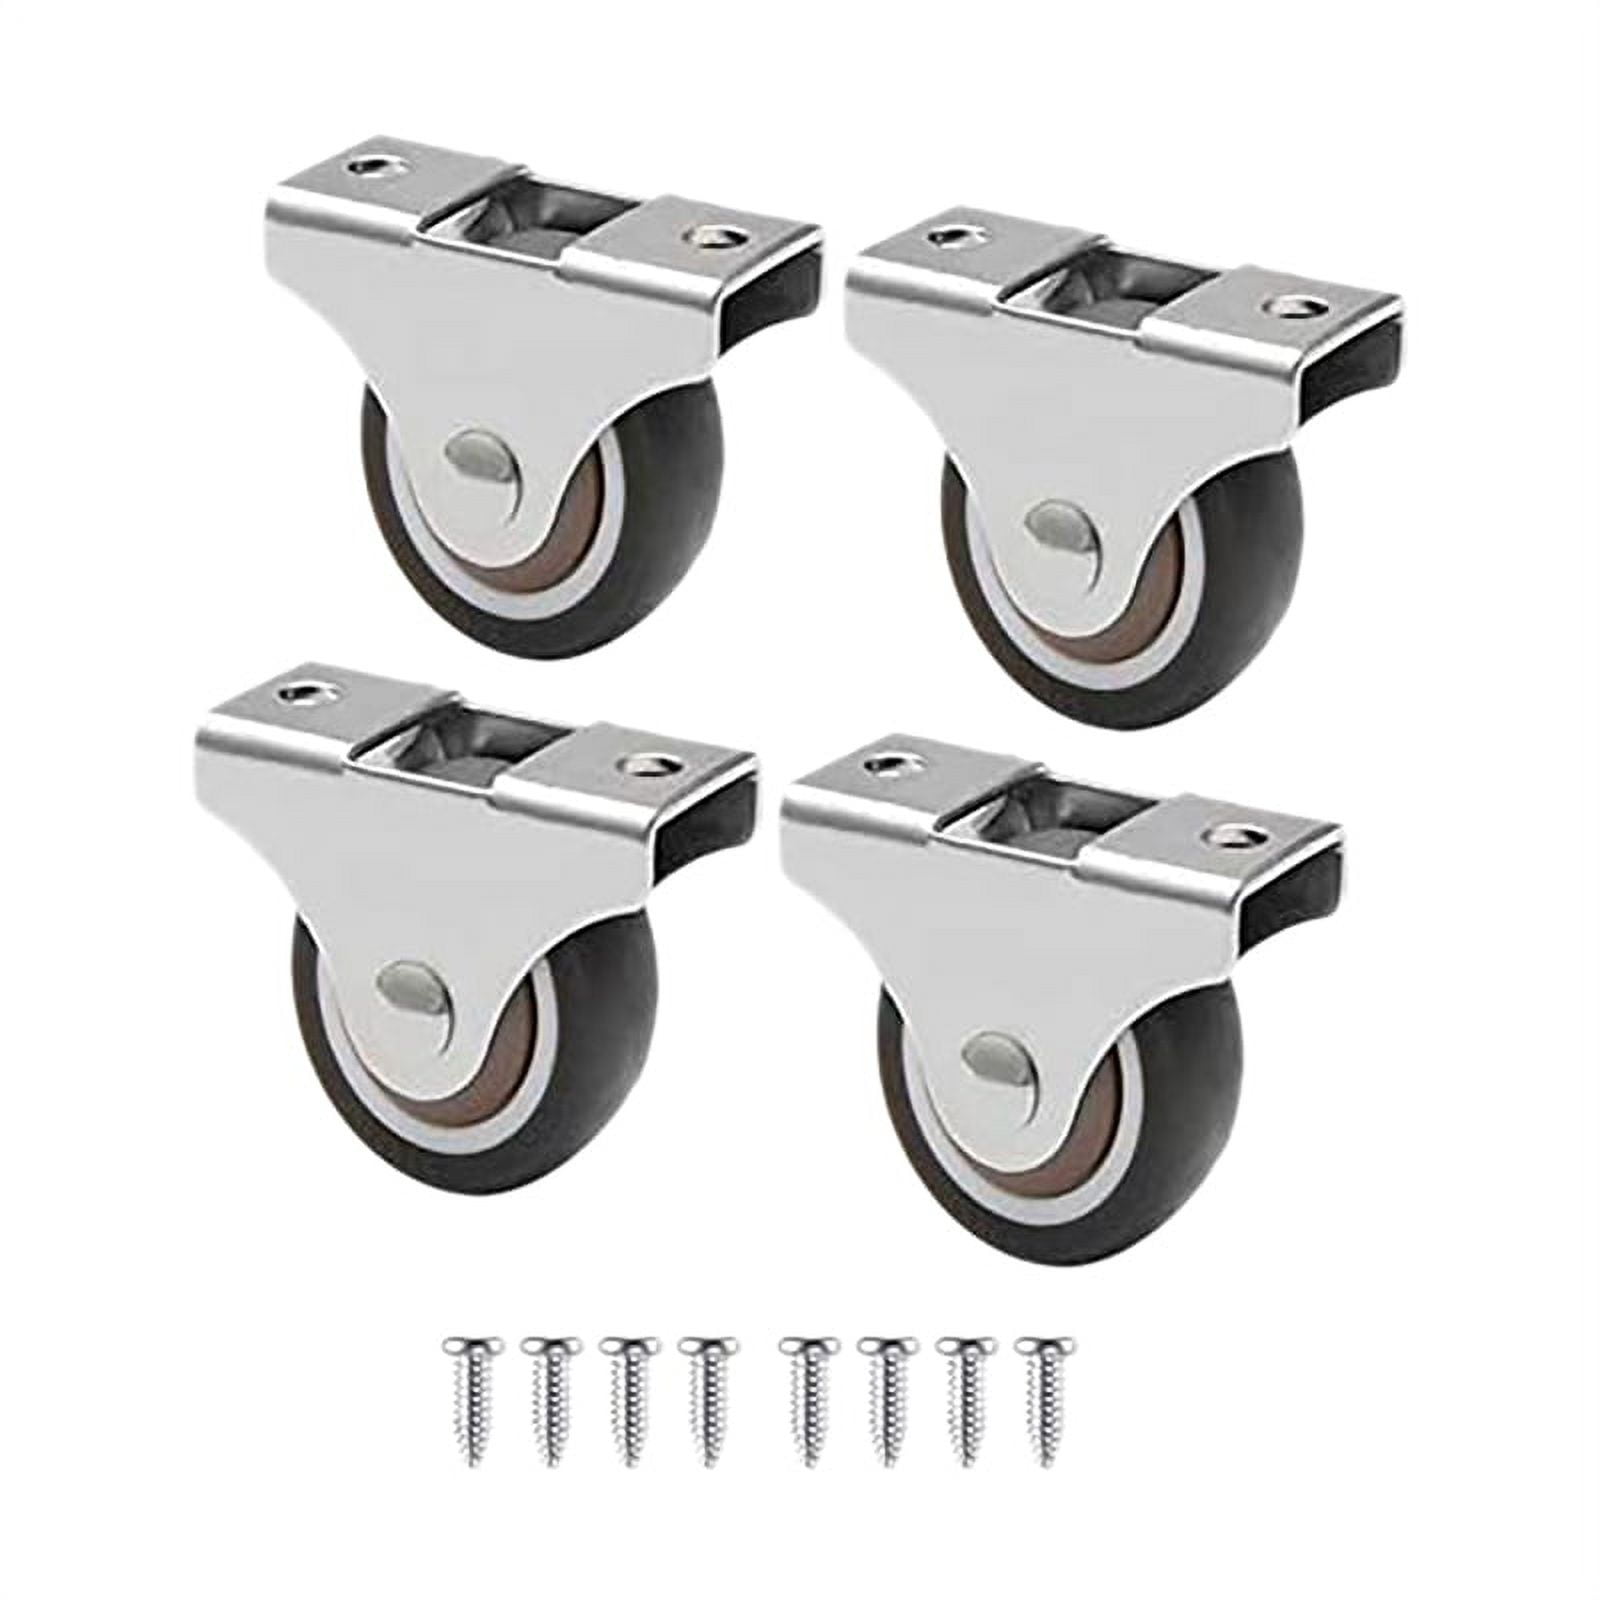 4 Small Fixed Castor Wheels,Silent Rubber Caster Wheels Furniture  Rollers,Furniture Replacement Caster Wheel Orienteering Drawer Caster  Wheel,with